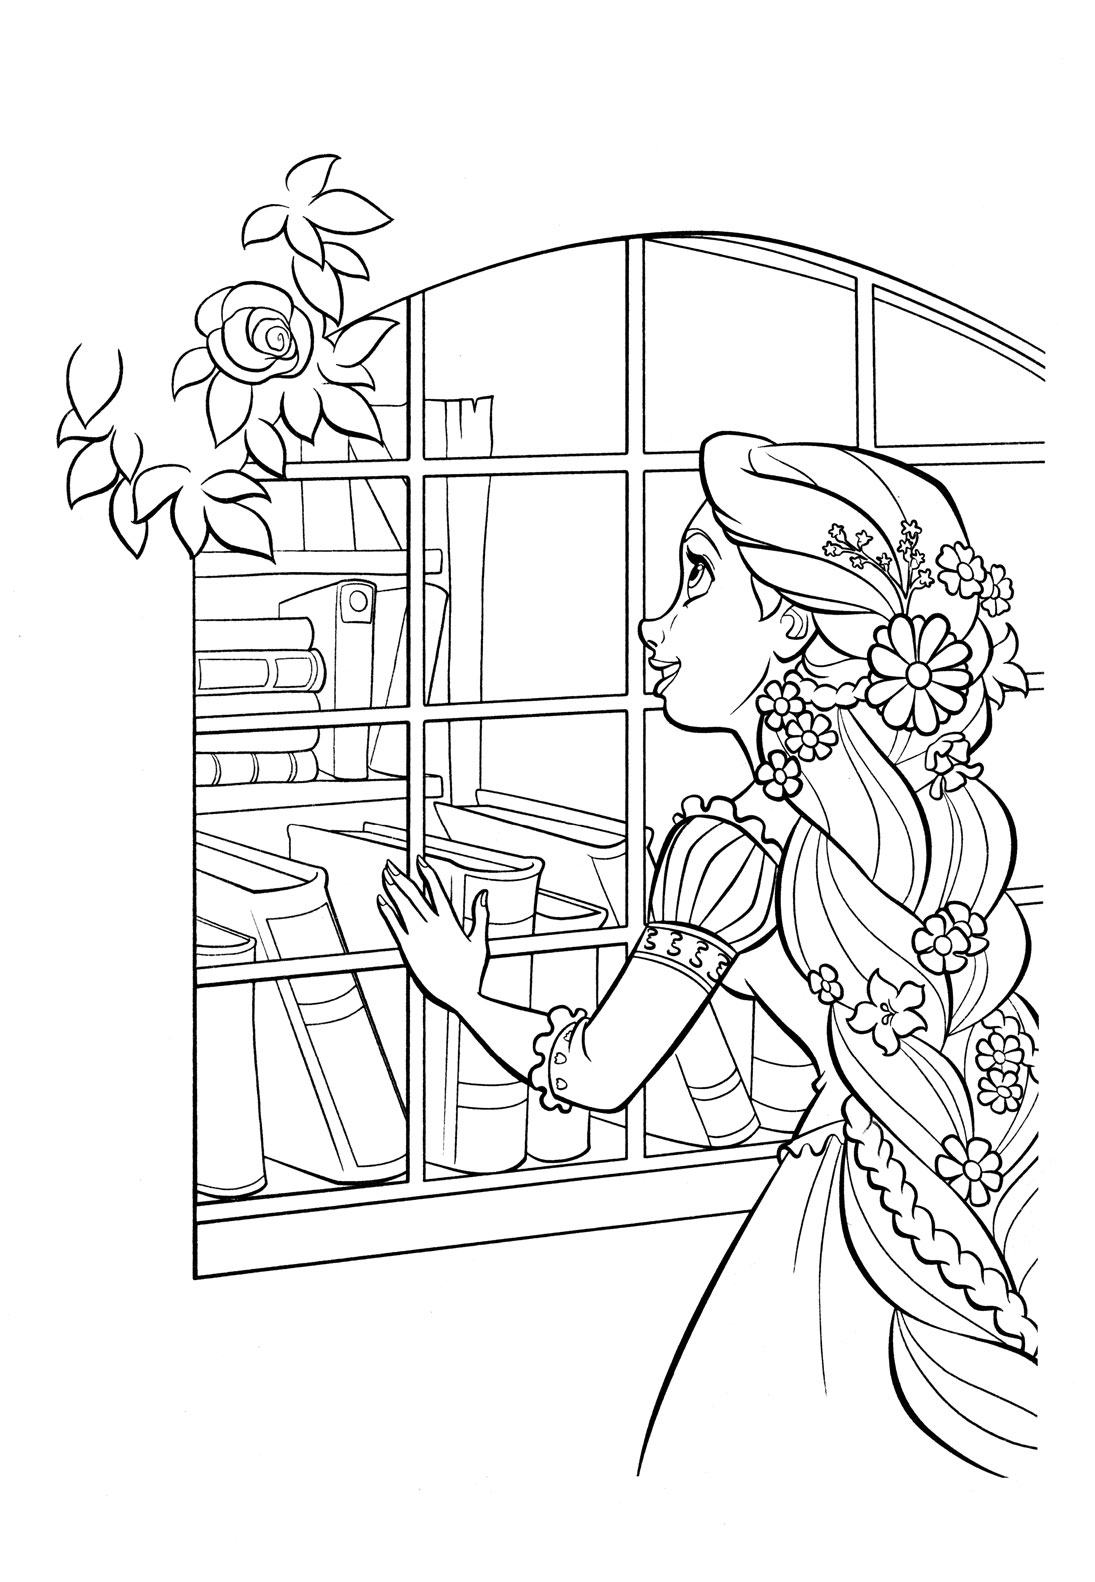 rapunzel-coloring-pages-best-coloring-pages-for-kids-get-this